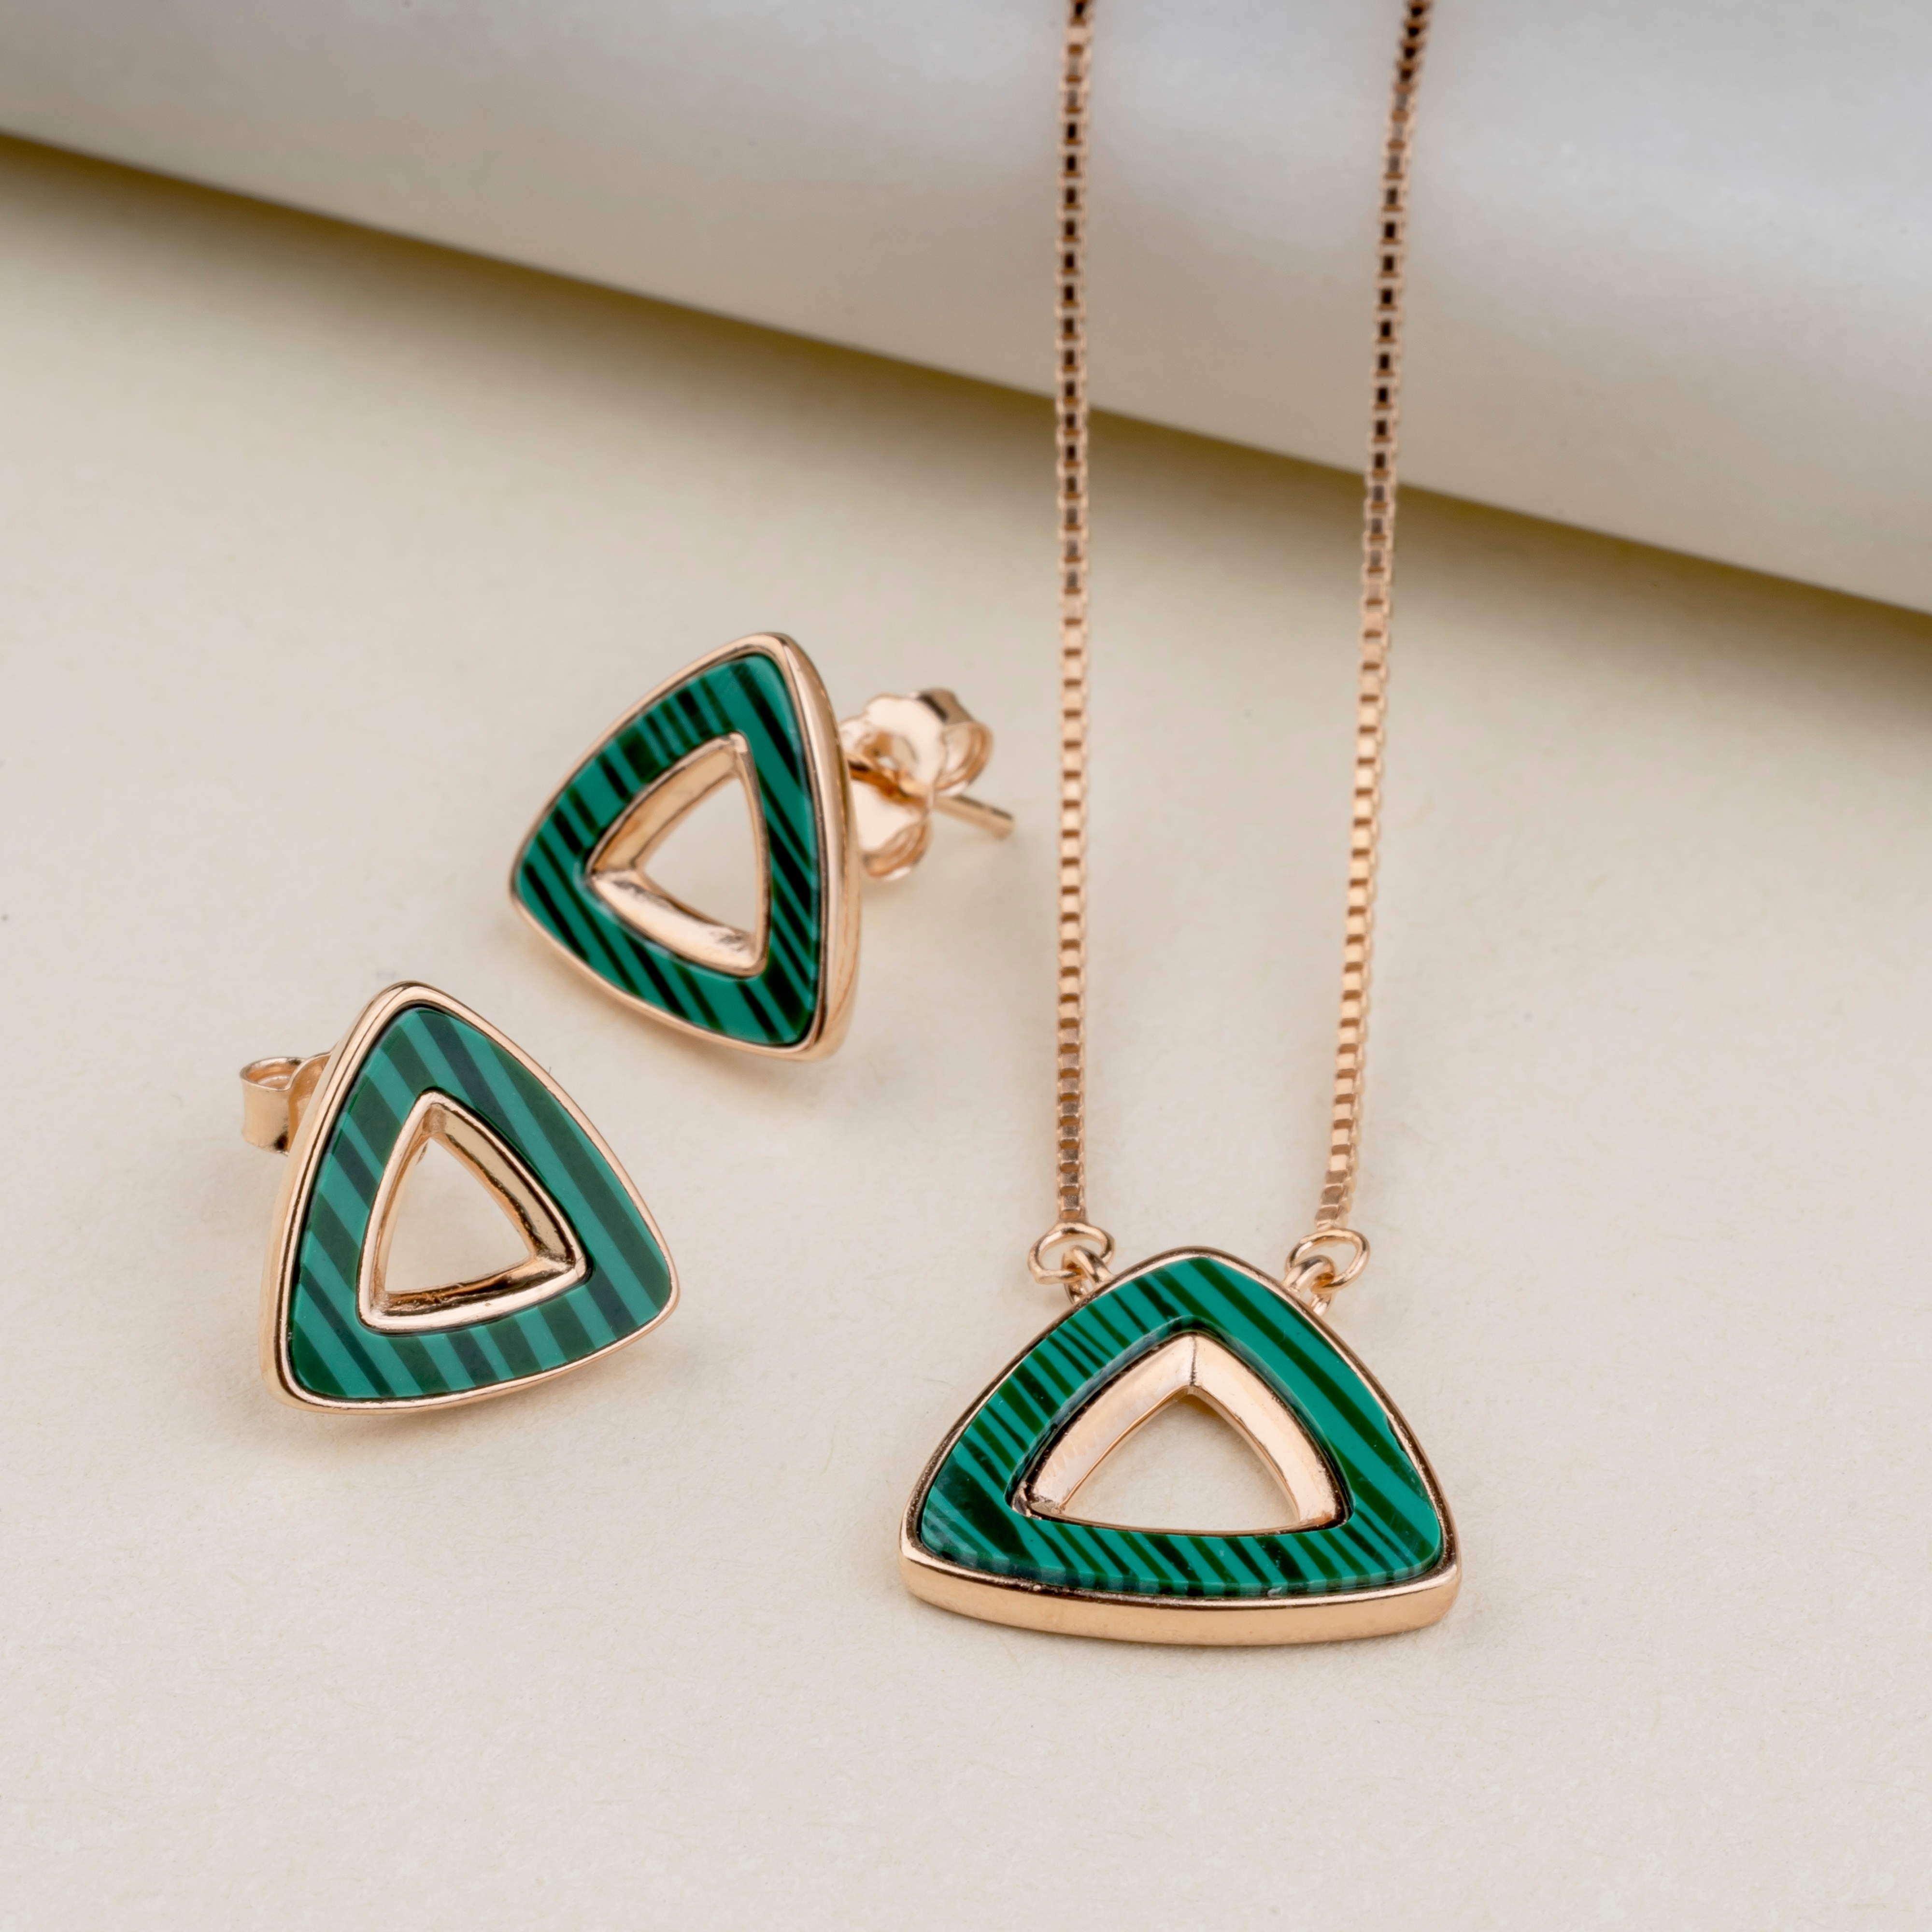 Silver Rose Green triangle Pendant Sets